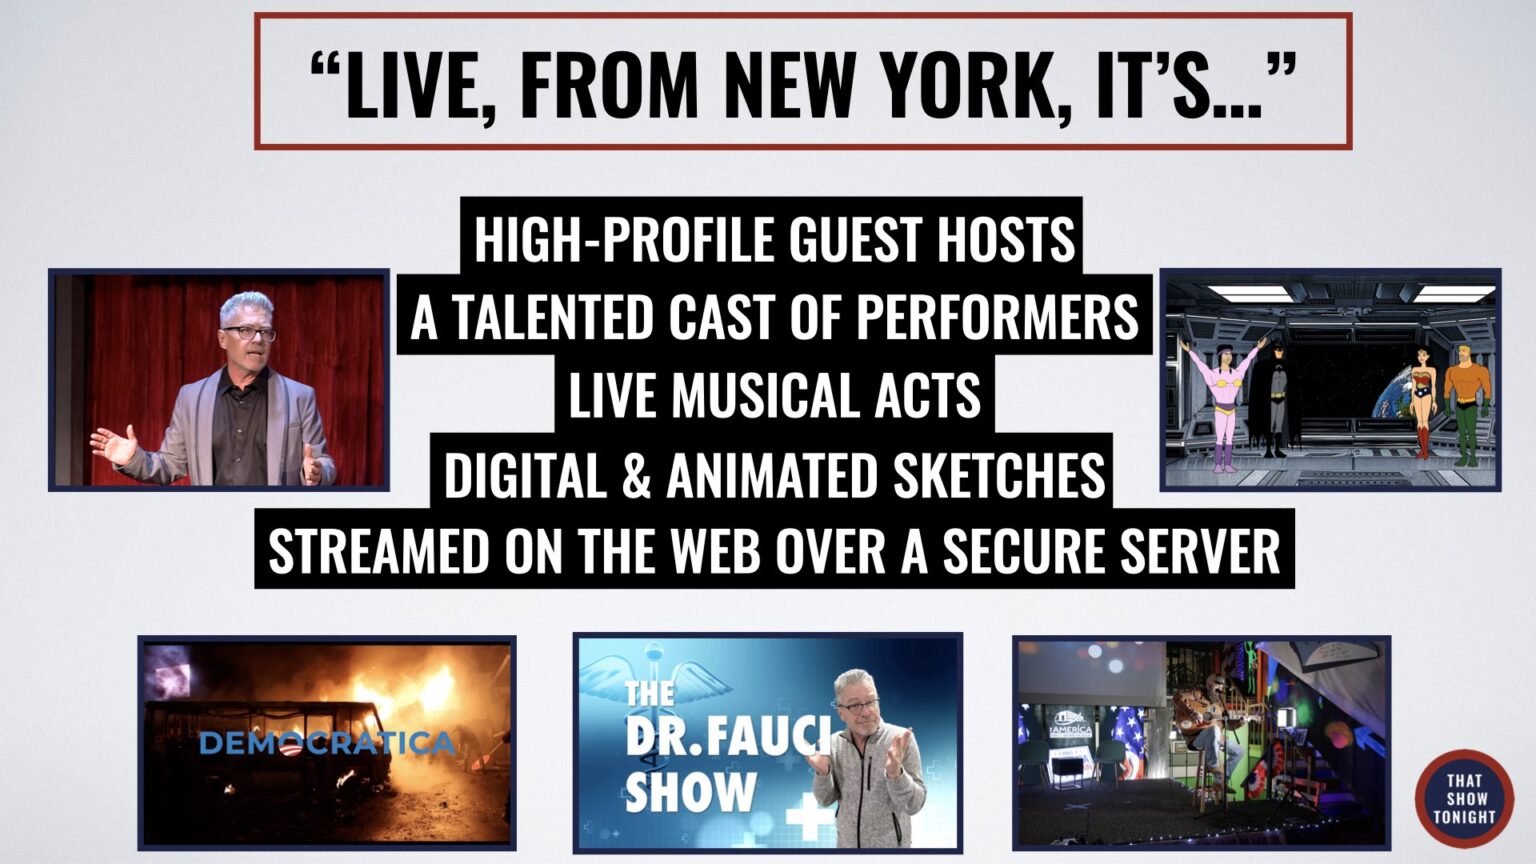 That Show Tonight Pitch Deck - Sept 2022.004